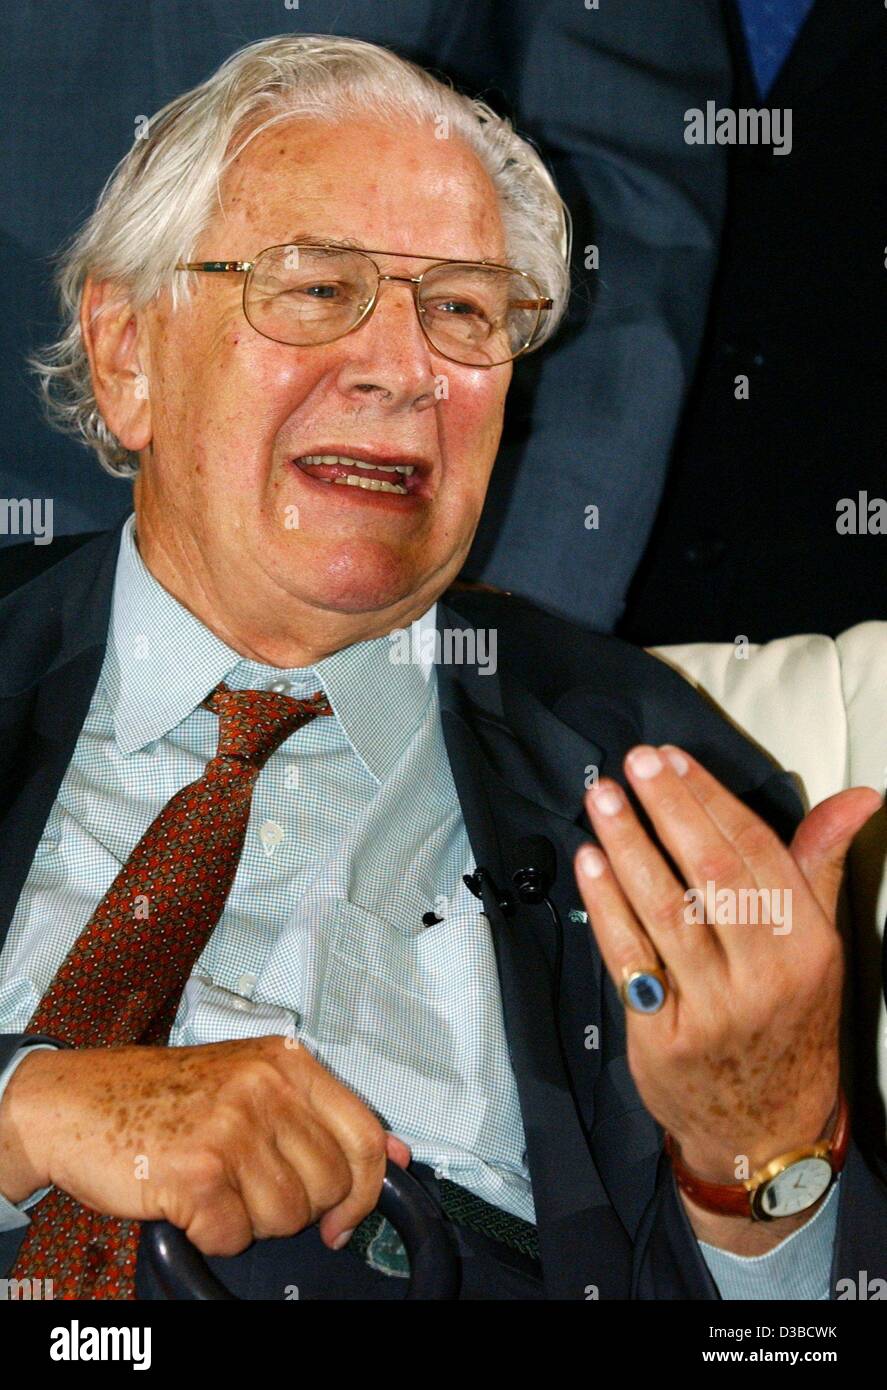 (dpa) - Sir Peter Ustinov speaks during the ceremony of the Planetary Consciousness Award in Frankfurt, 6 October 2002. The award of the 'Club of Budapest' was presented to Ustinov for his 'global consciousness'. The Club of Budapest, founded in 1993 by the Club of Rome, tries to find solutions to g Stock Photo